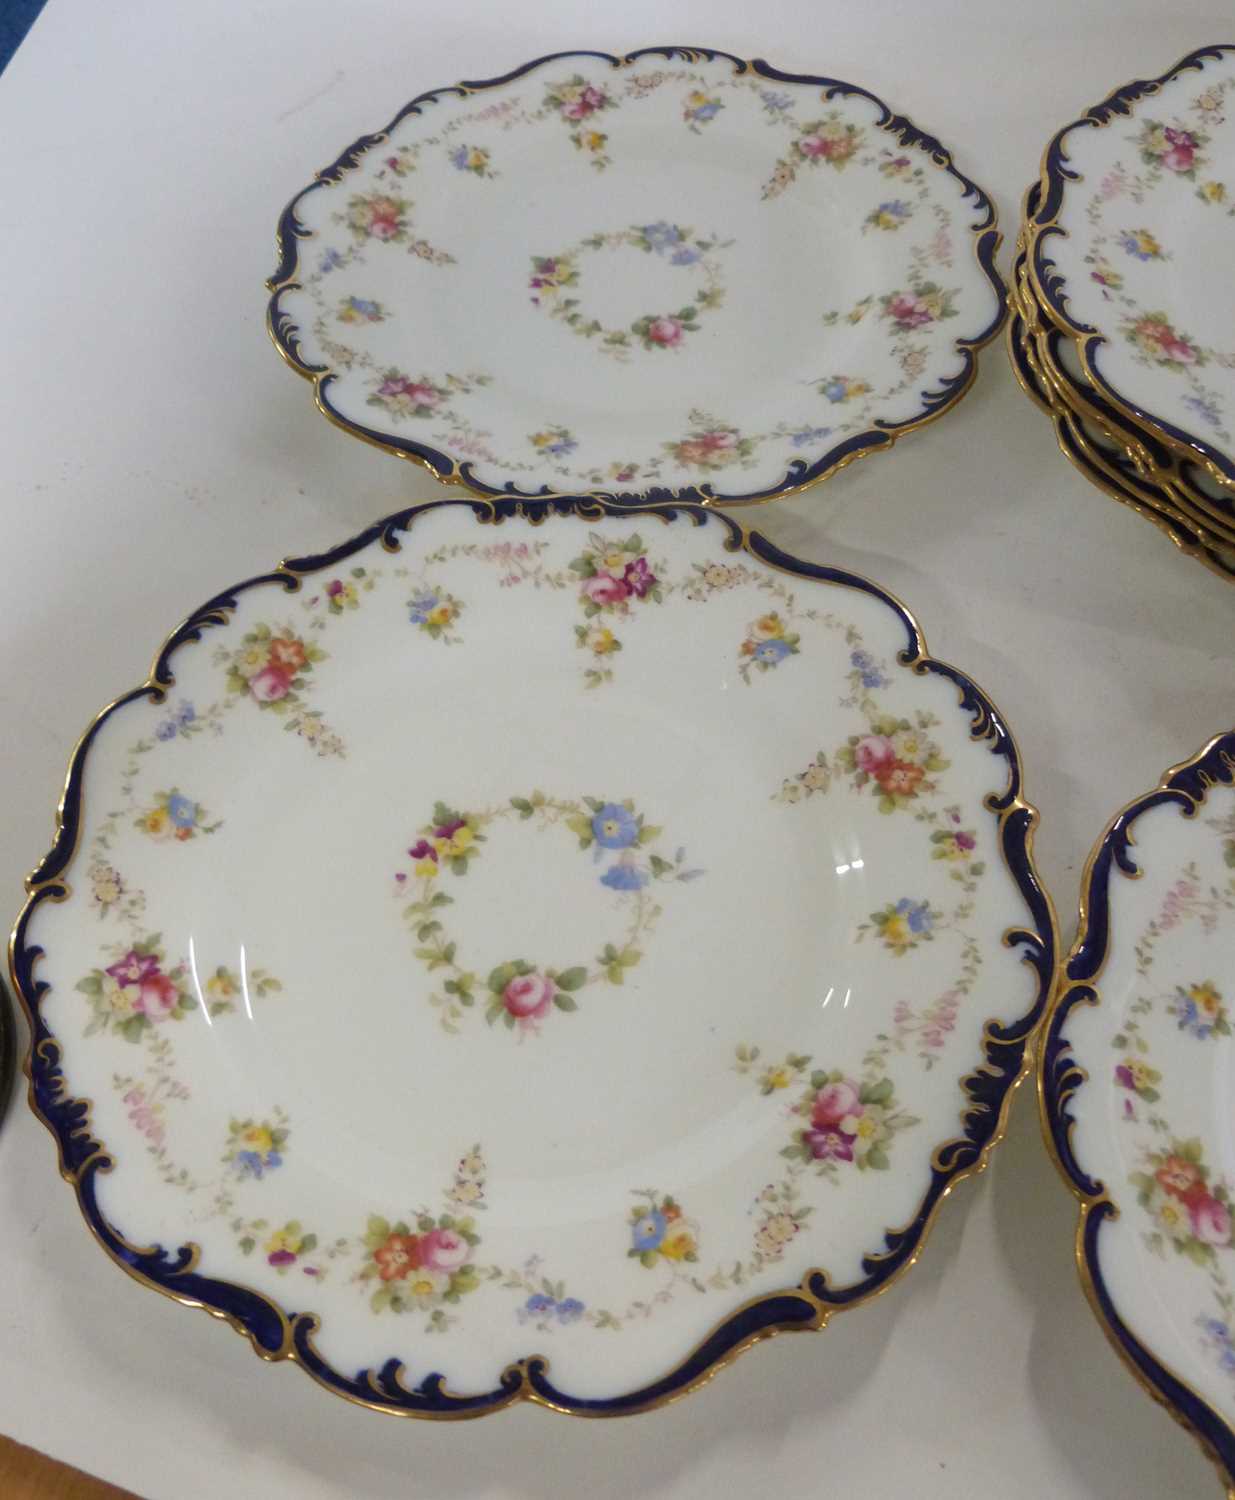 Quantity of Cauldon tea wares, all with printed floral designs within blue scroll borders, - Image 4 of 8